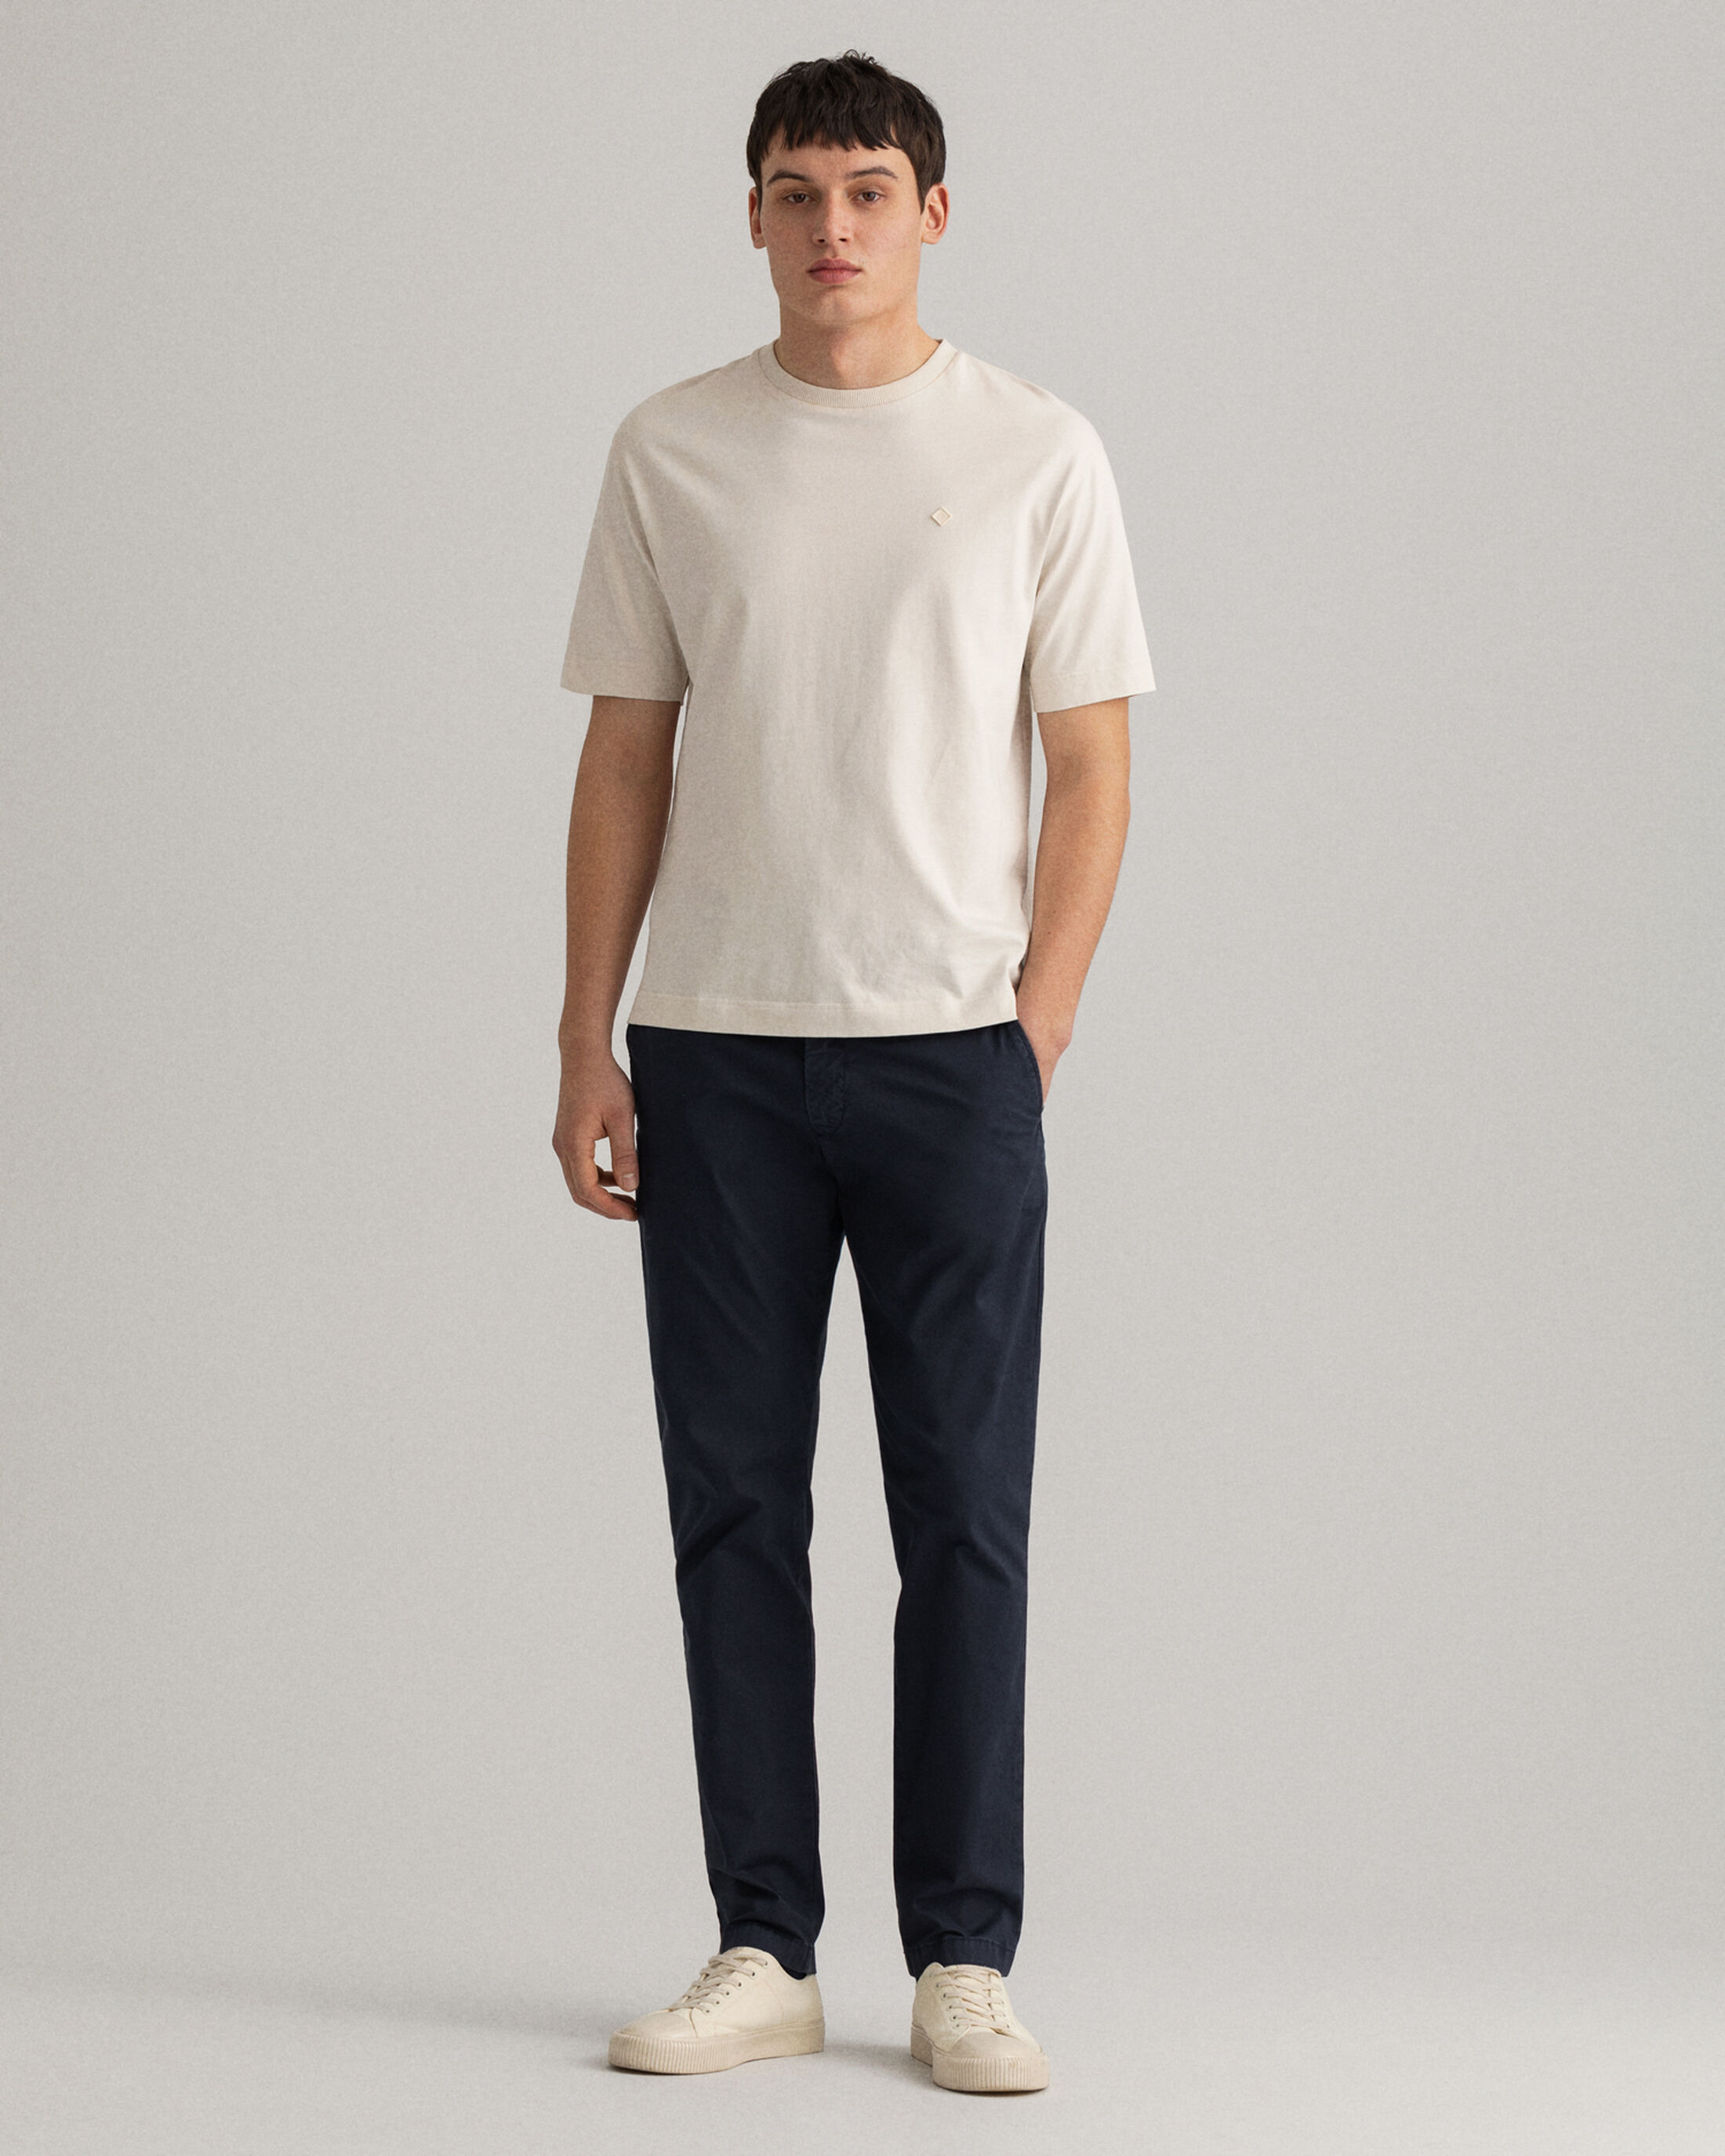  Hallden Slim Fit Sunfaded chino 